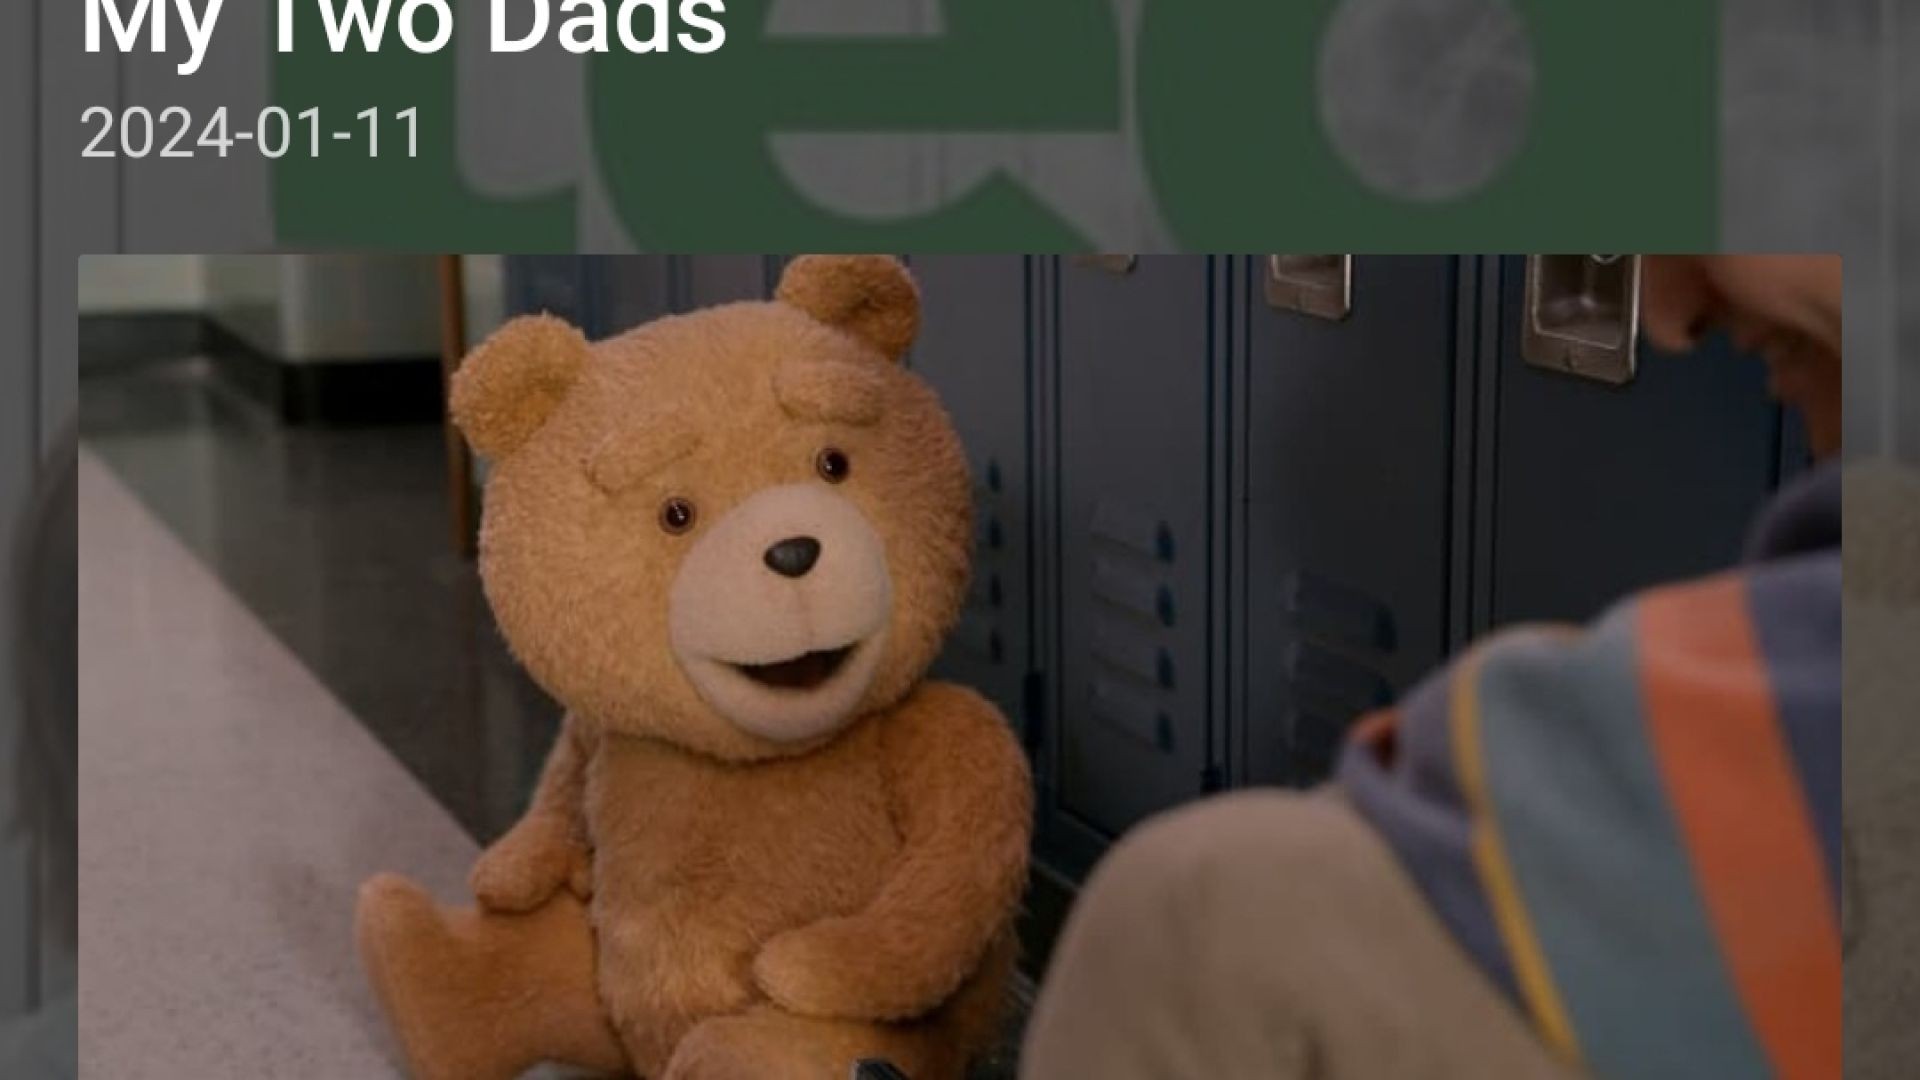 Ted Season 1 EP 2 My Two Dads